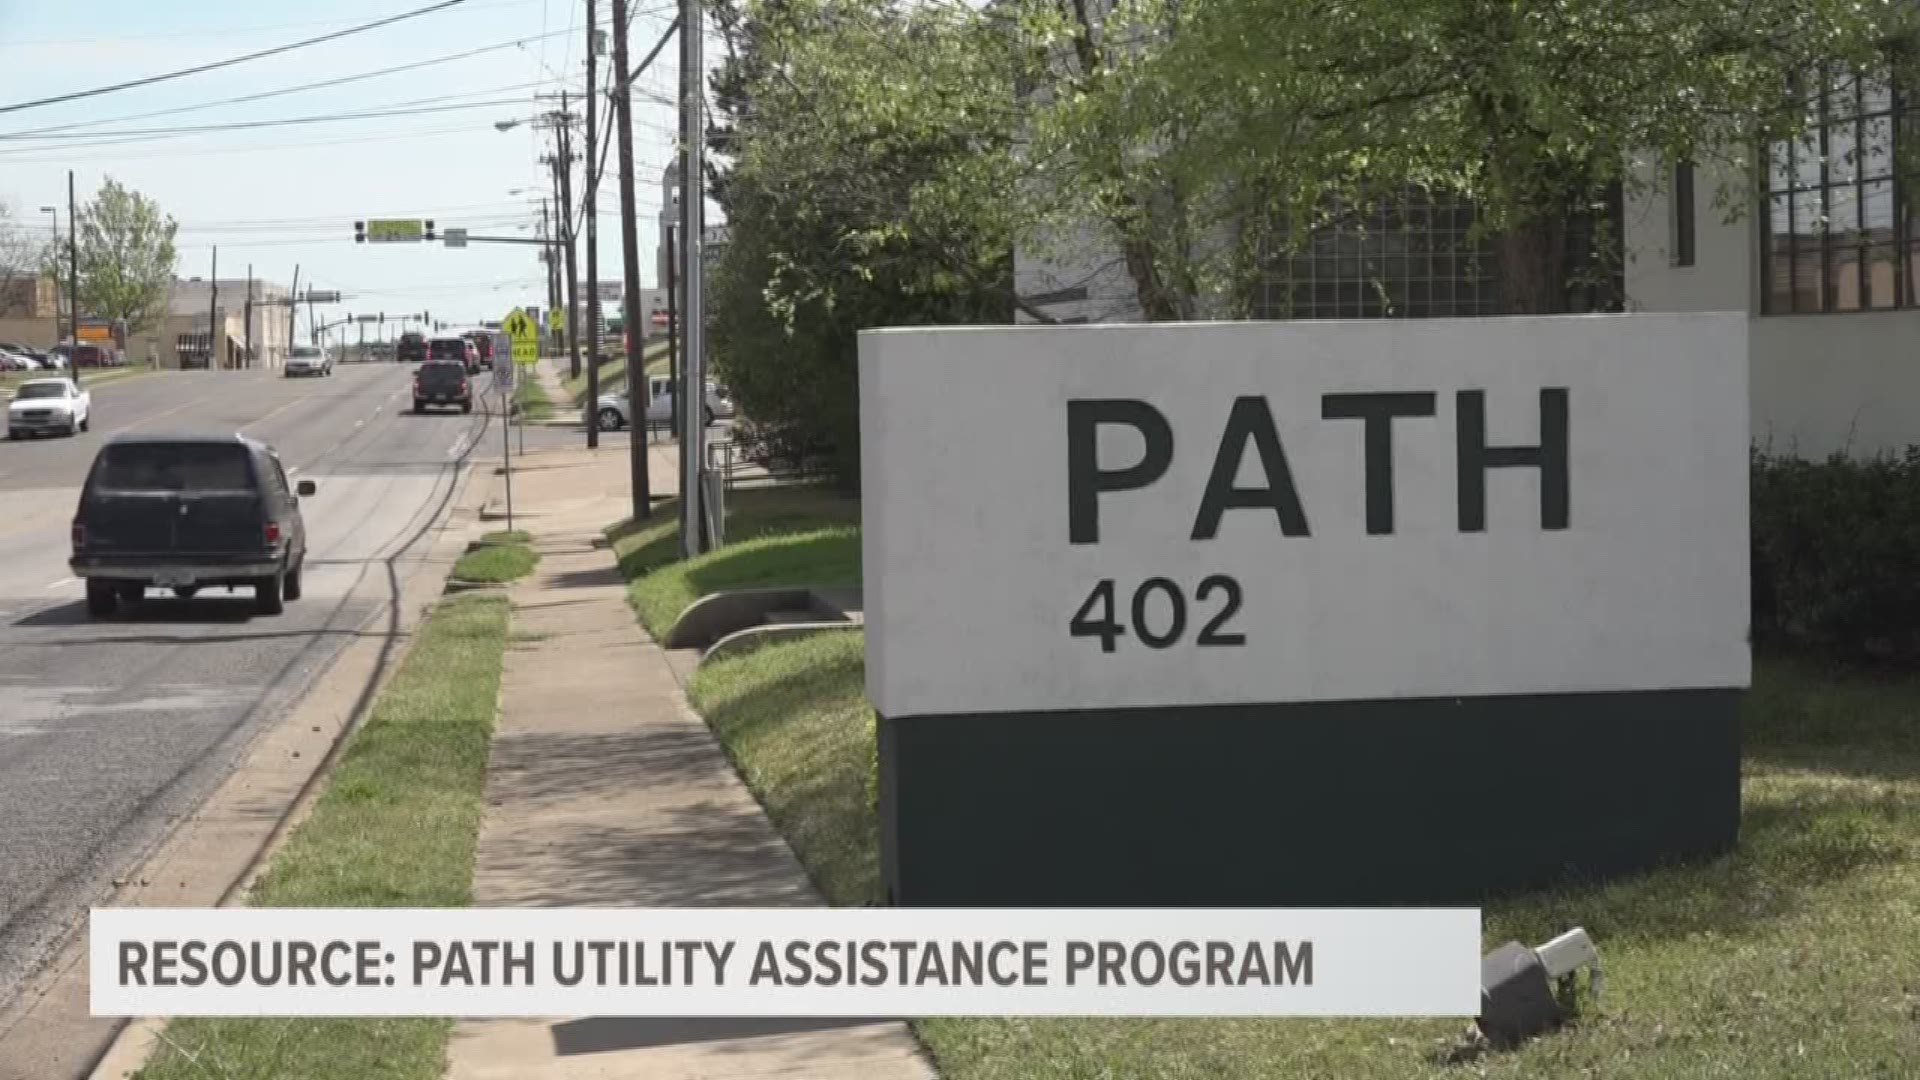 With a mission to help those in immediate need in Tyler and surrounding towns, PATH, also known as People Attempting to Help, has offered an endless list of services since 1985. It's Utility Assistance Program focuses on assisting families who may normally make ends meet, but who've hit a bump in the road, a one-time event.